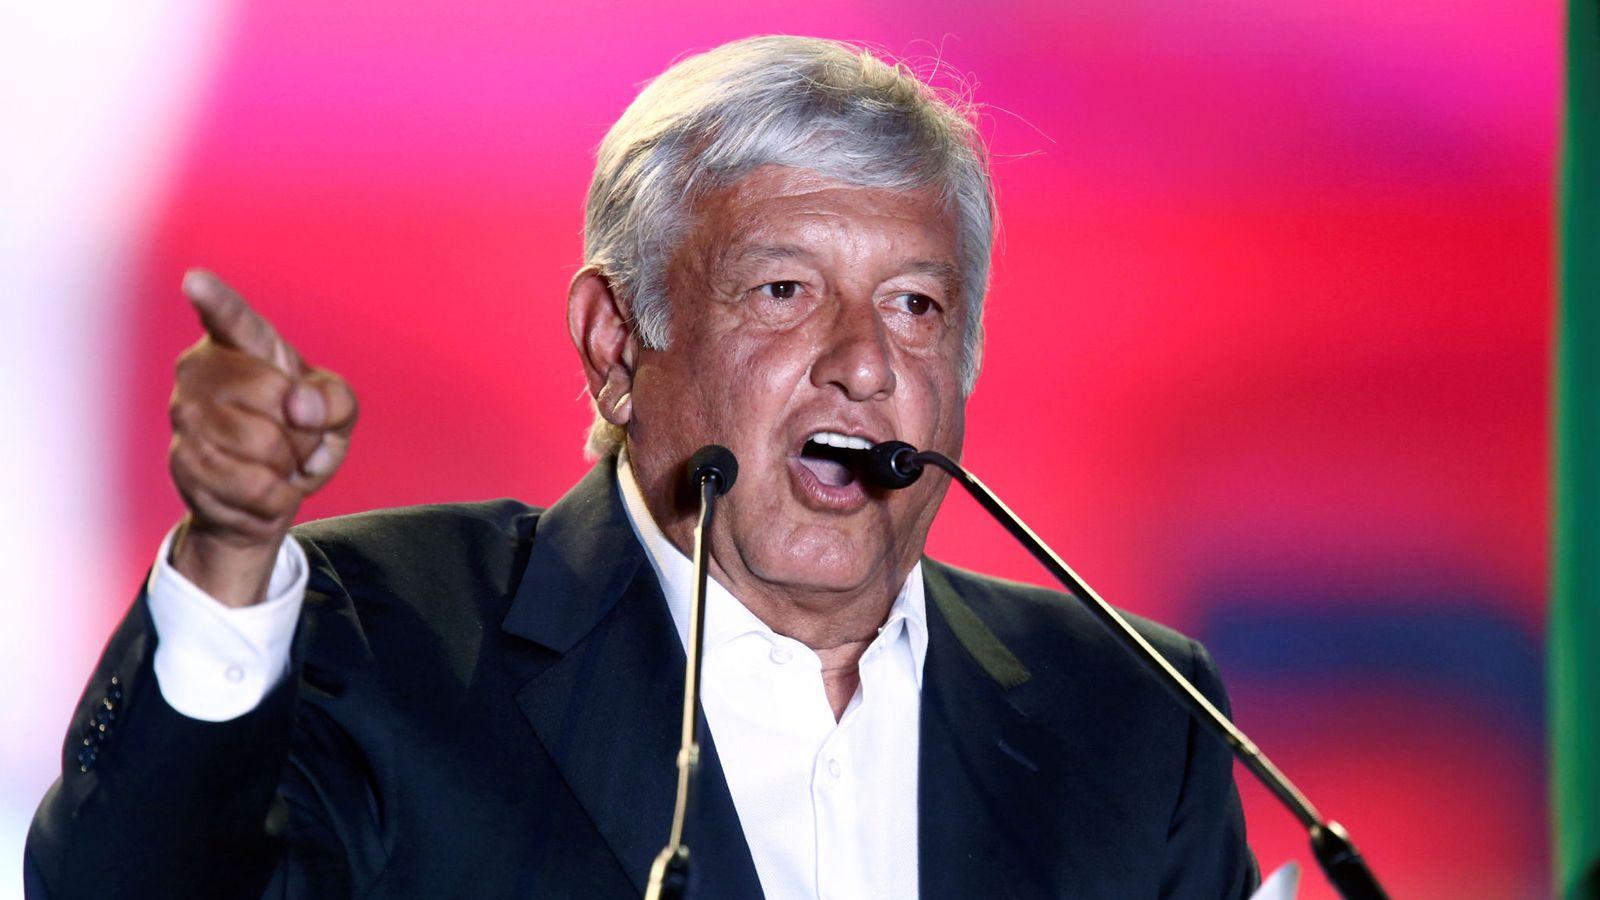 Mexican voters are pinning their hopes on populist Andres Manuel